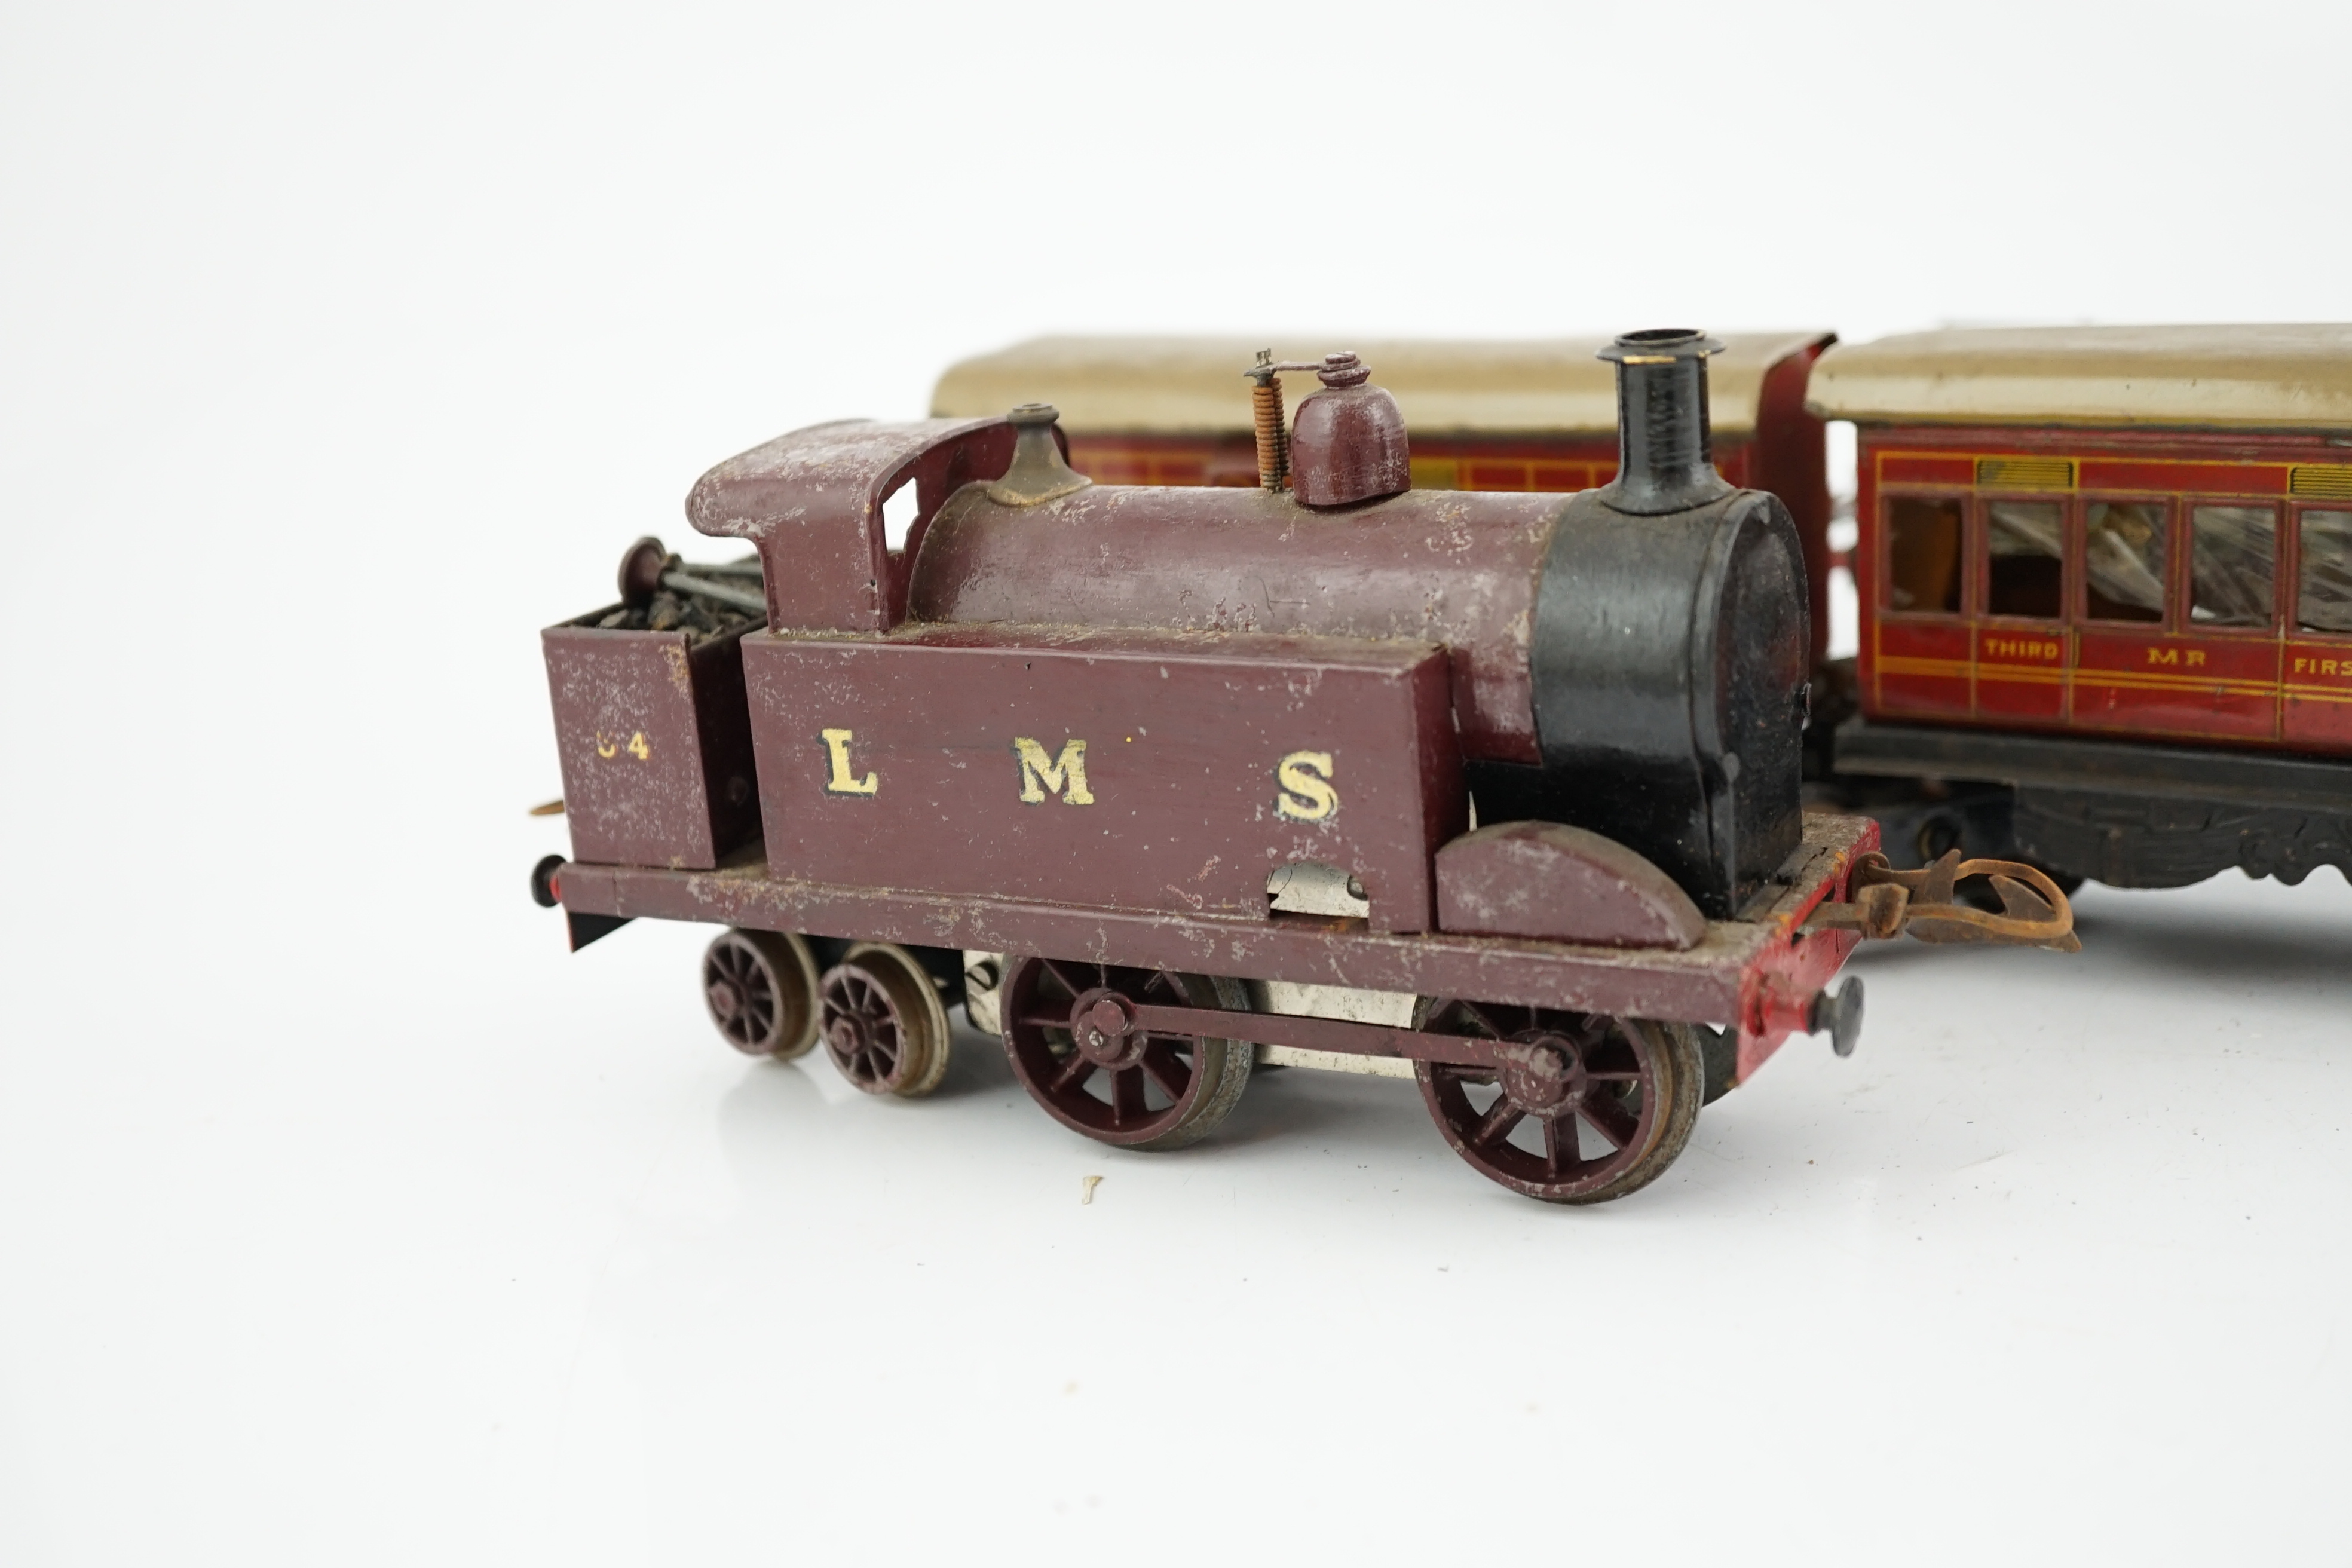 Ten 0 gauge tinplate railway items, most adapted from other parts and models, including three clockwork locomotives; n LSWR 4-4-0 tender loco, an LMS 0-4-4T loco and an SR 0-4-2T loco, together with four SR 4-wheel coach